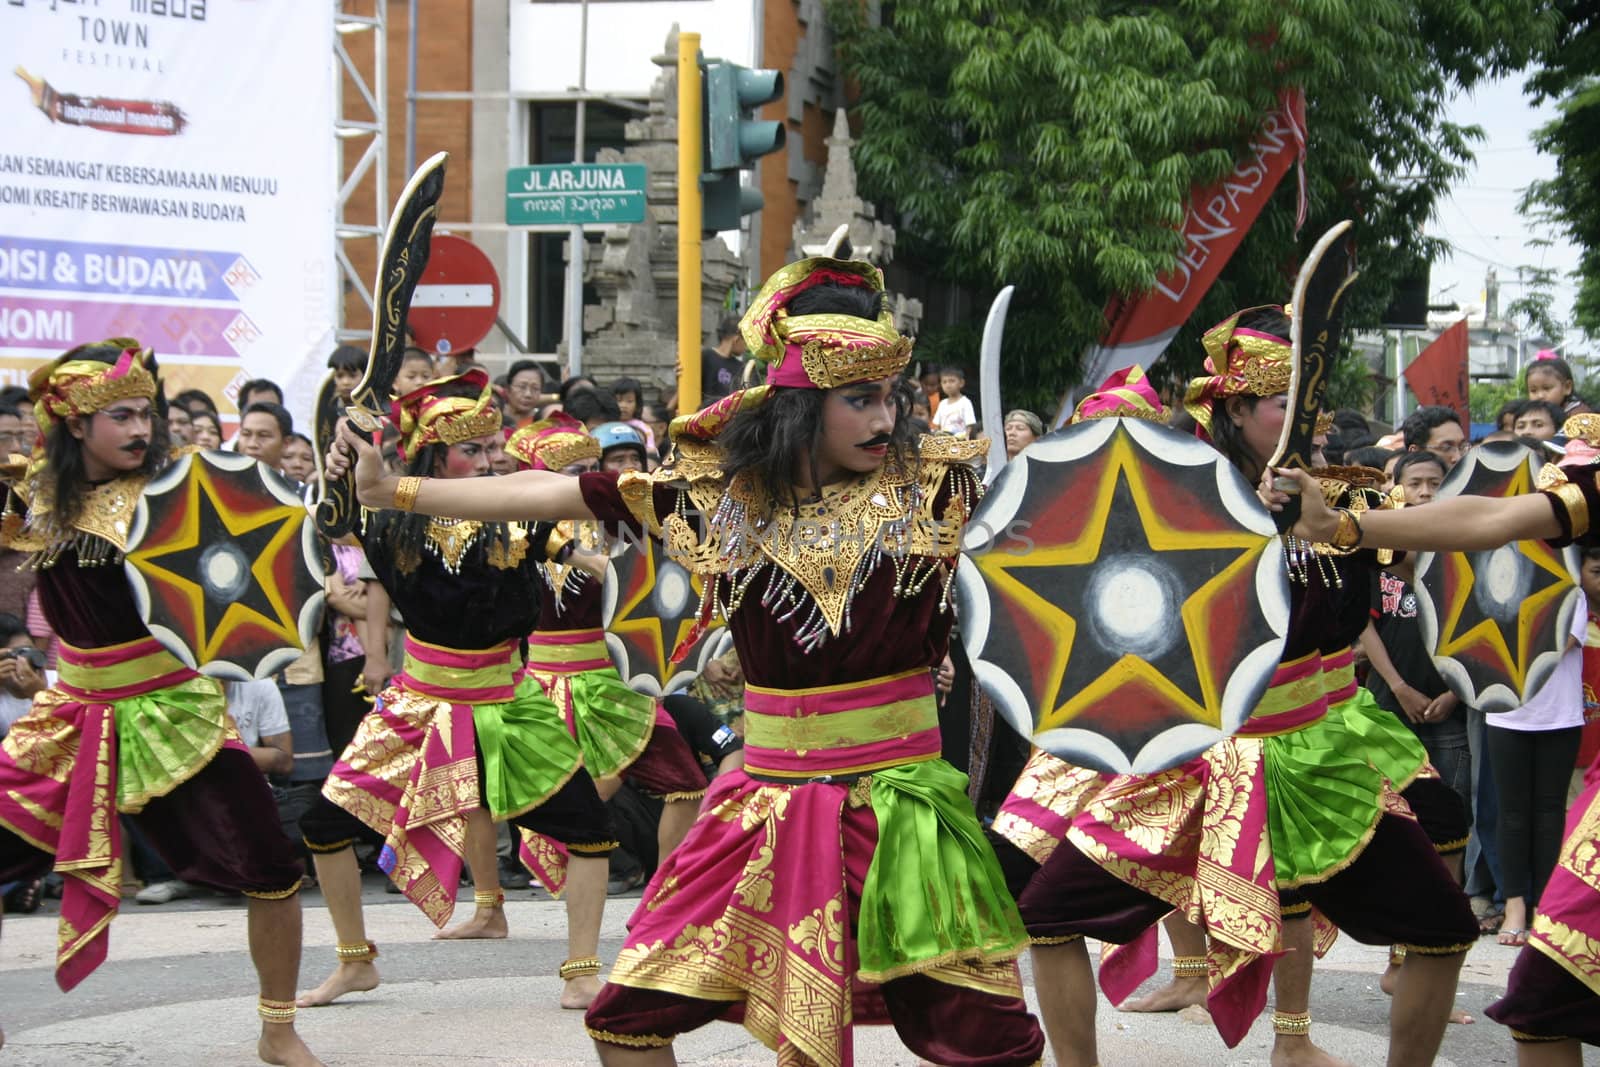 Balinese dancing performance on the street at Gajah Mada Town Festival, Bali, on December 28, 2008. It is a inspirational memories of Denpasar town,